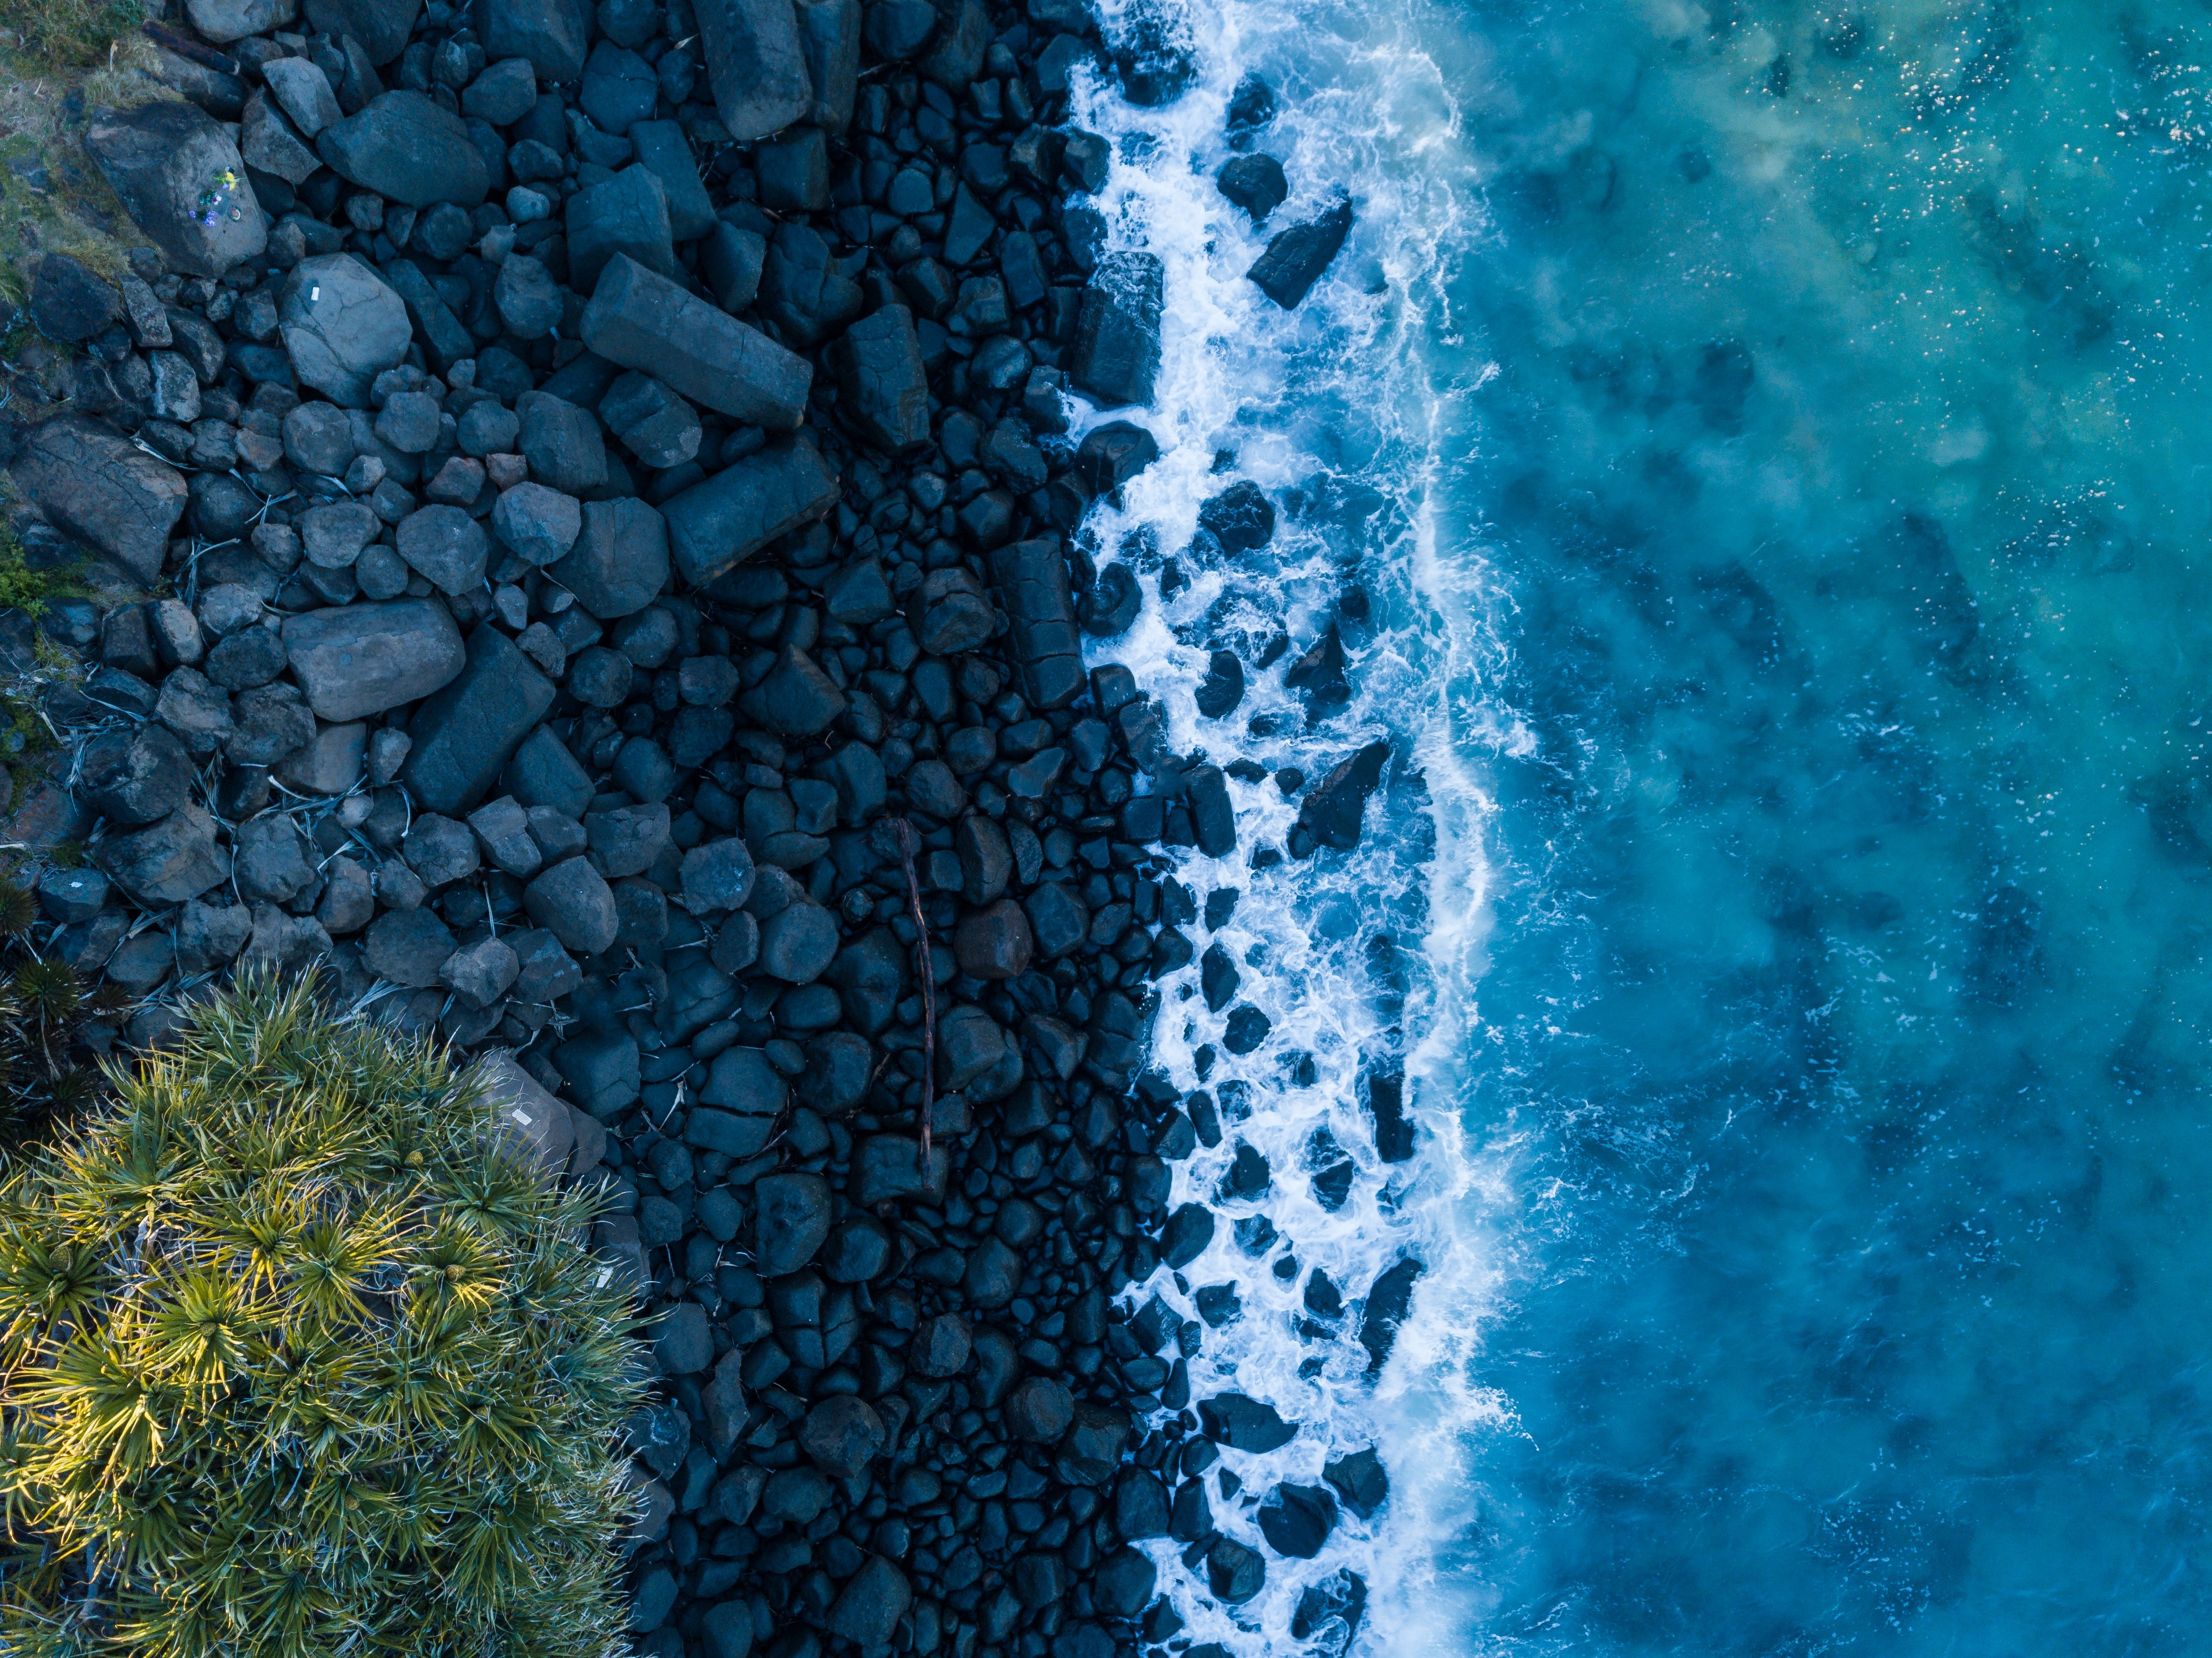 view from above, nature, stones, shore, bank, ocean, surf wallpaper for mobile